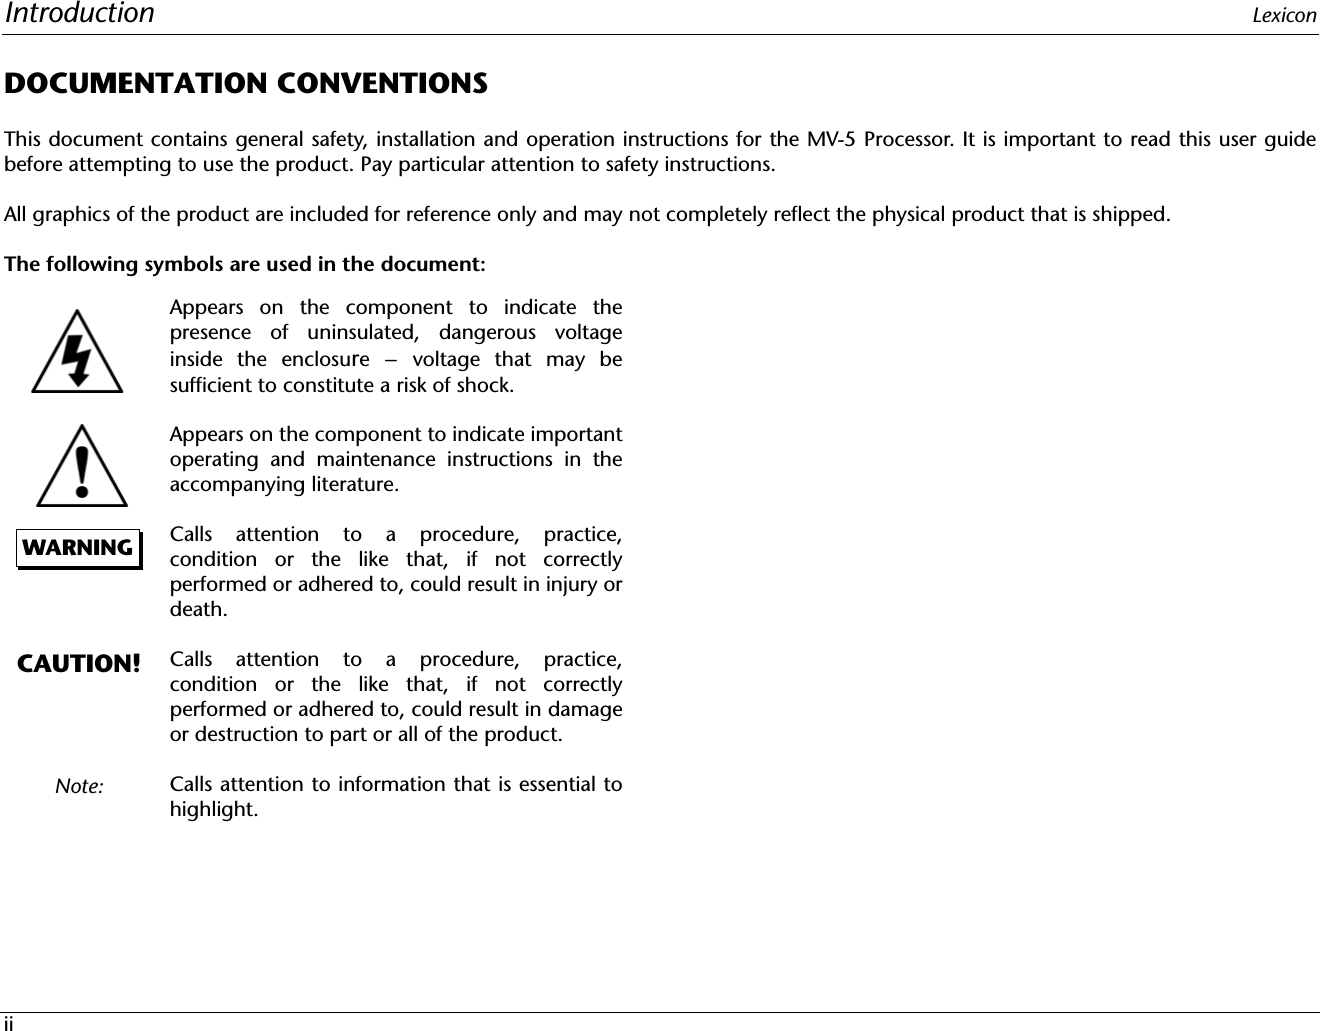 Introduction LexiconiiDOCUMENTATION CONVENTIONSThis document contains general safety, installation and operation instructions for the MV-5 Processor. It is important to read this user guidebefore attempting to use the product. Pay particular attention to safety instructions.All graphics of the product are included for reference only and may not completely reflect the physical product that is shipped.The following symbols are used in the document:Appears on the component to indicate thepresence of uninsulated, dangerous voltageinside the enclosure – voltage that may besufficient to constitute a risk of shock.Appears on the component to indicate importantoperating and maintenance instructions in theaccompanying literature.Calls attention to a procedure, practice,condition or the like that, if not correctlyperformed or adhered to, could result in injury ordeath.Calls attention to a procedure, practice,condition or the like that, if not correctlyperformed or adhered to, could result in damageor destruction to part or all of the product.Calls attention to information that is essential tohighlight.WARNINGCAUTION!Note: